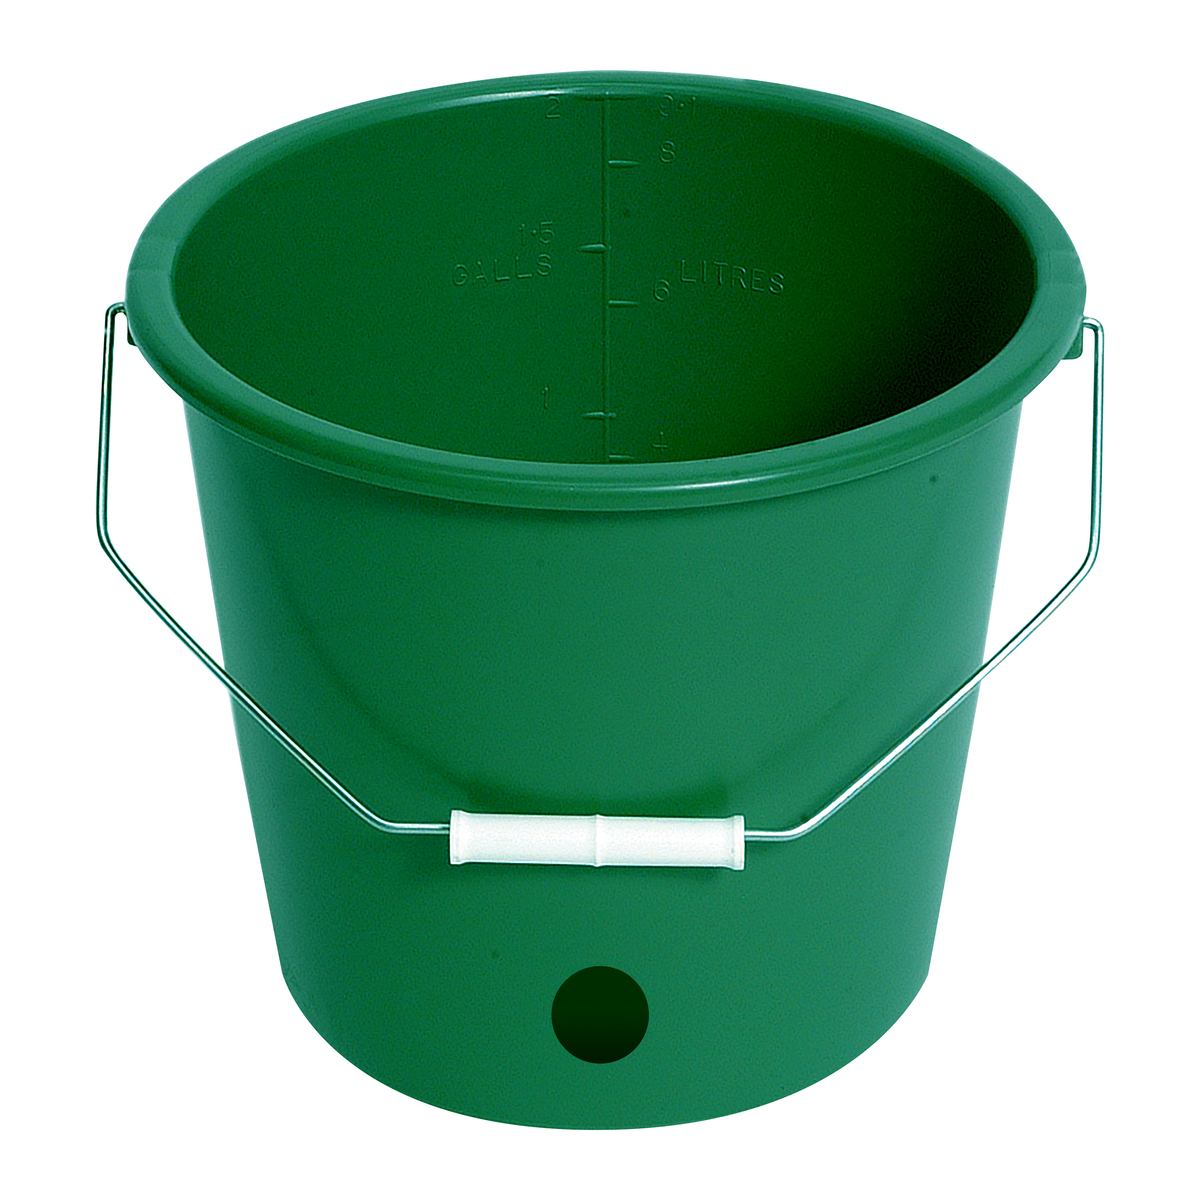 CALF FEED BUCKET WITH METAL HANDLE PACK OF 3 GREEN BUCKETS 2 GALLON 